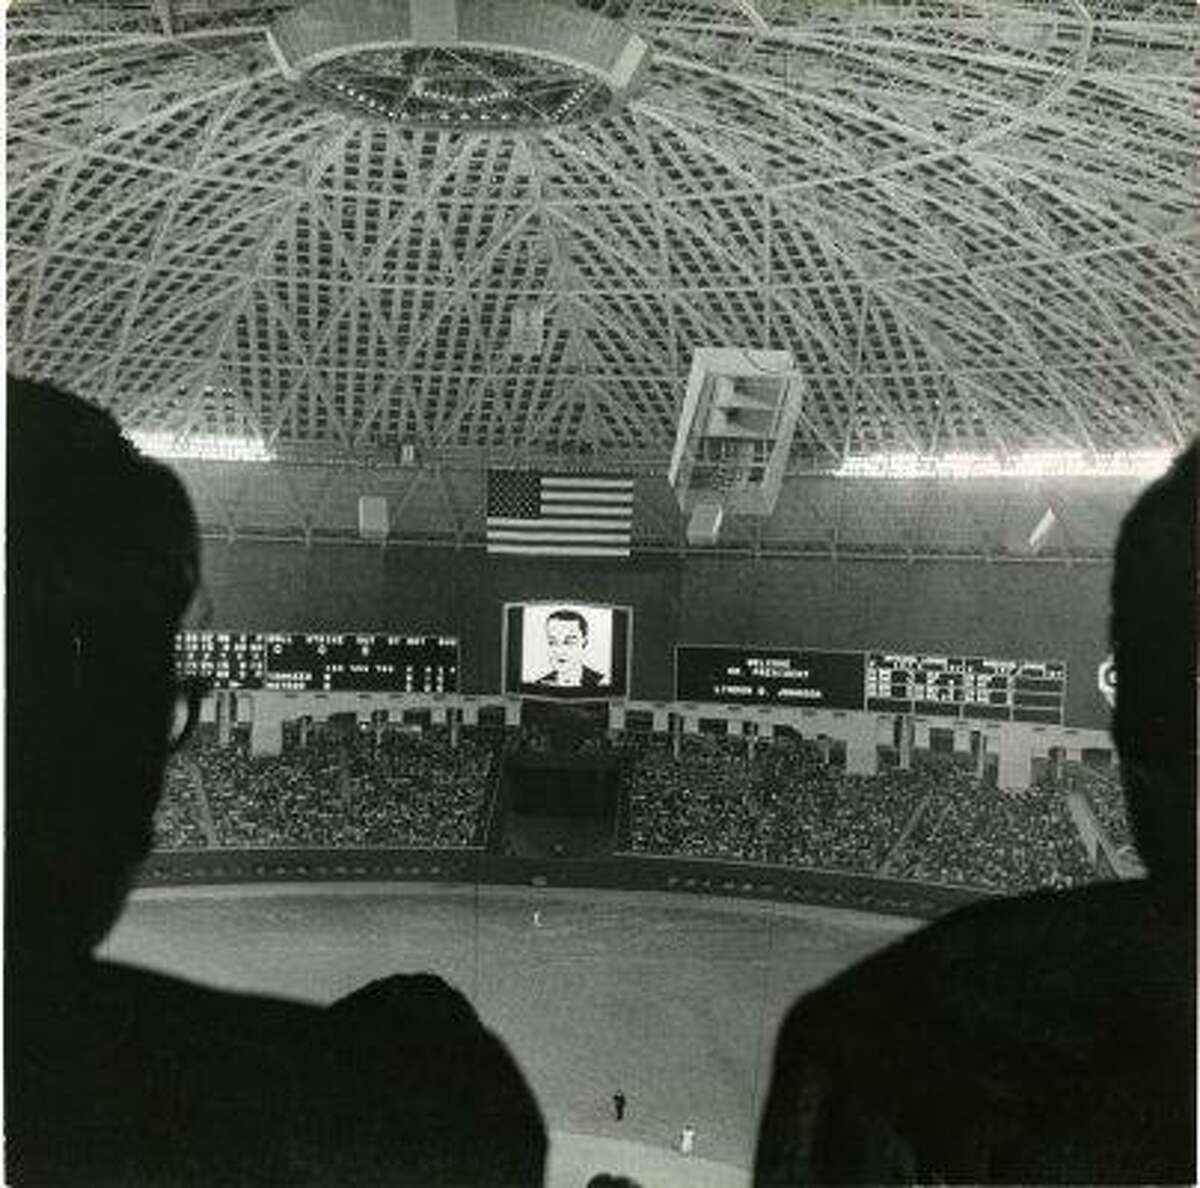 The Astrodome scoreboard lit up in 1965 to welcome President Lyndon Baines Johnson to the world's first indoor baseball game.